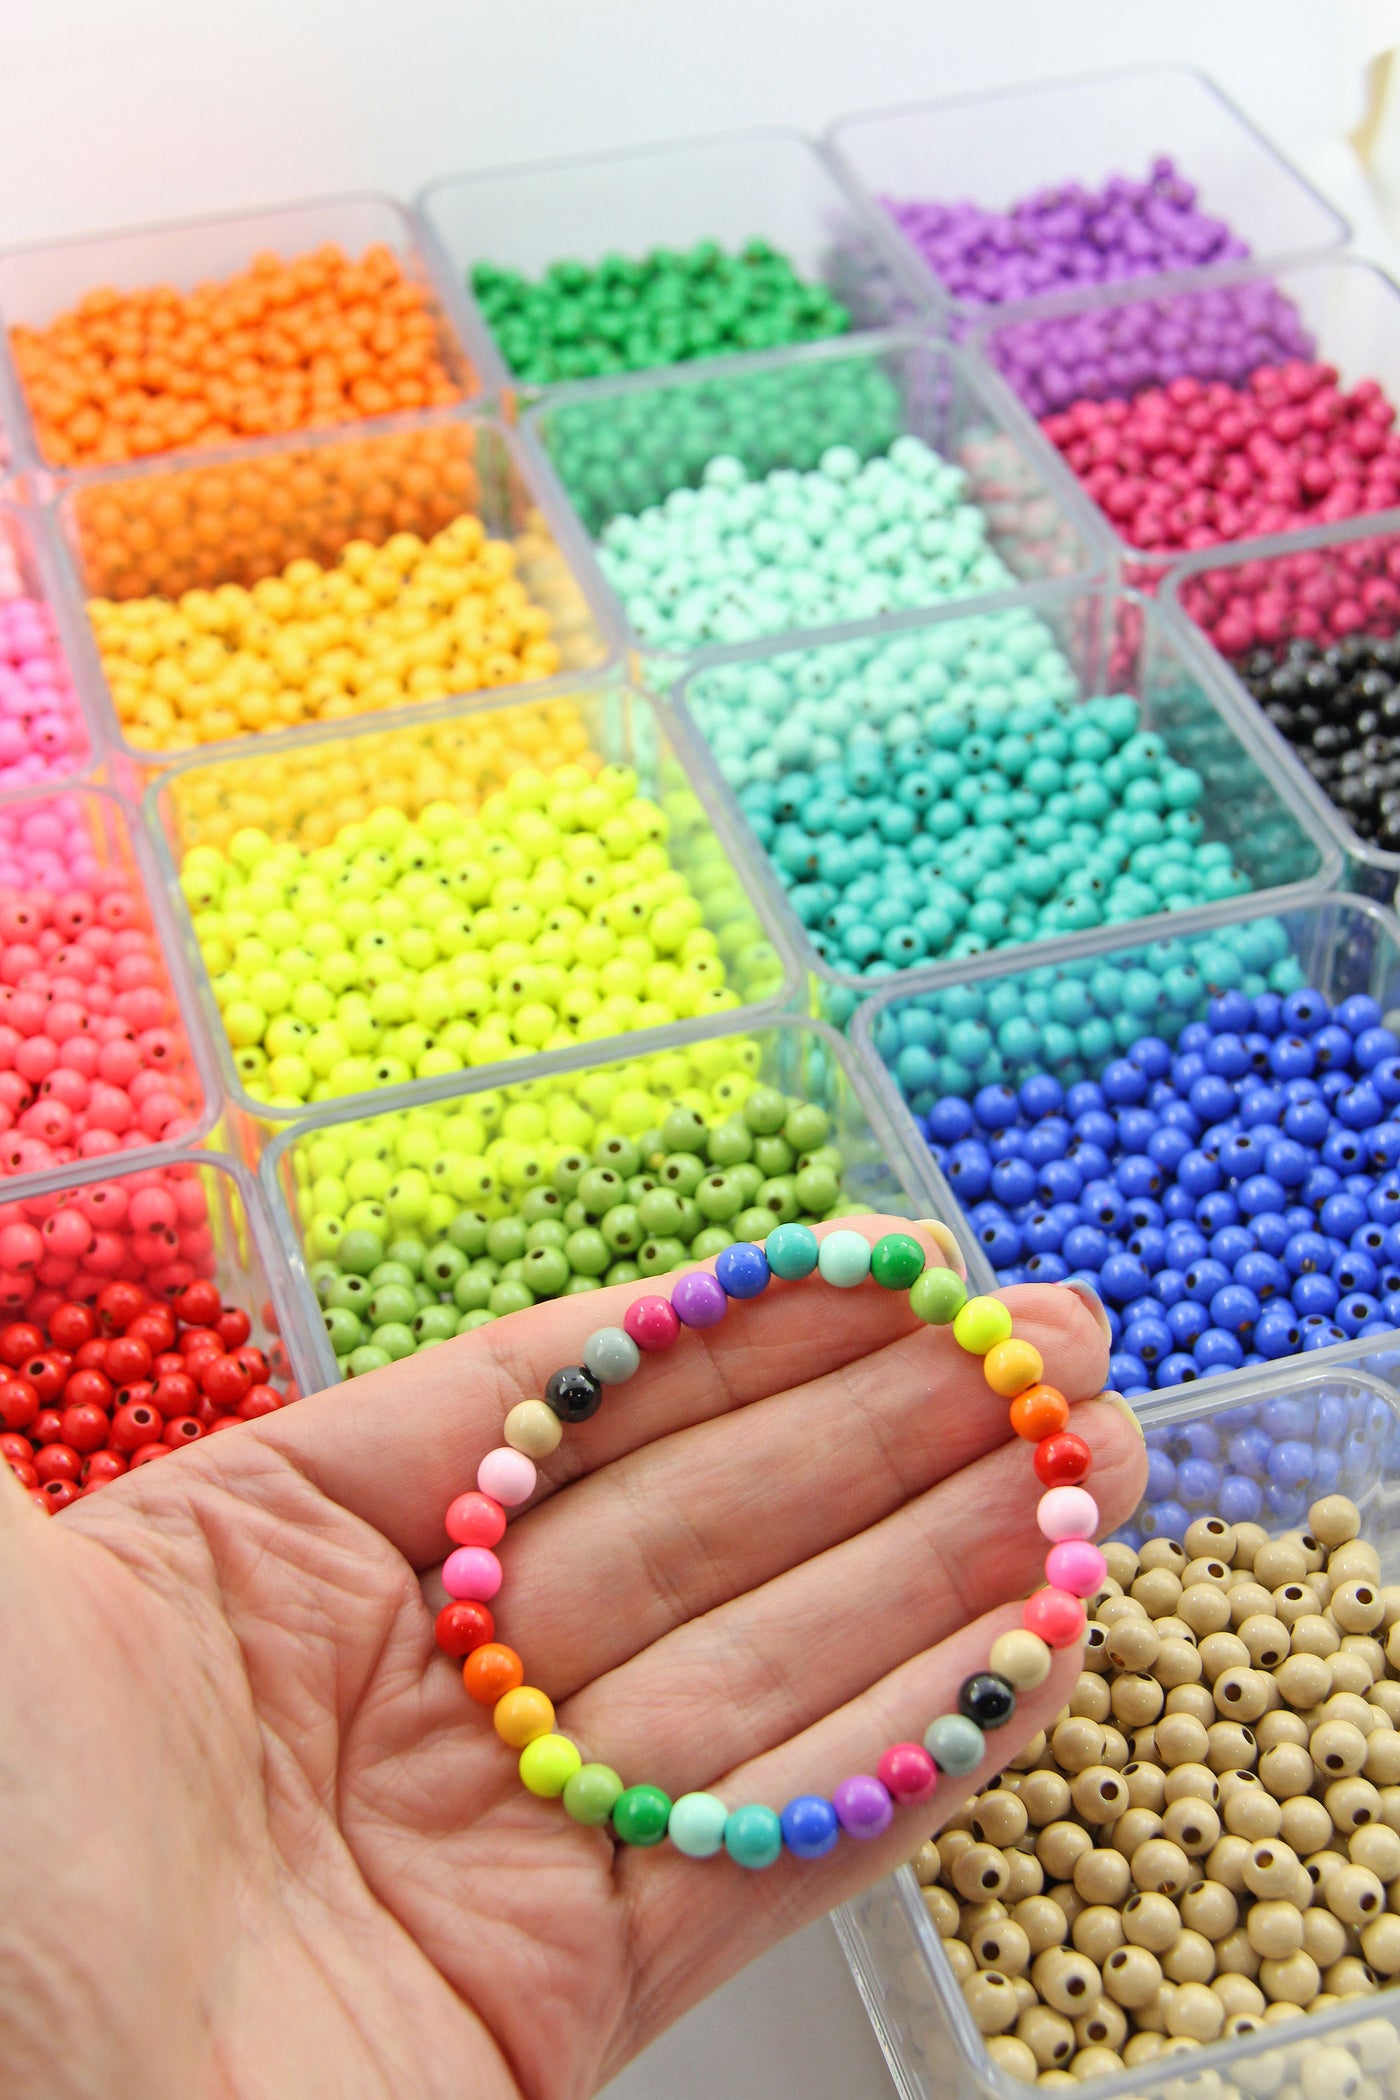 30pcs 3x6mm Tube Enamel Beads Painted Grease Colorful Beads For Bracelets  Making Rainbow Jewelry Making Accessory Supplier - AliExpress